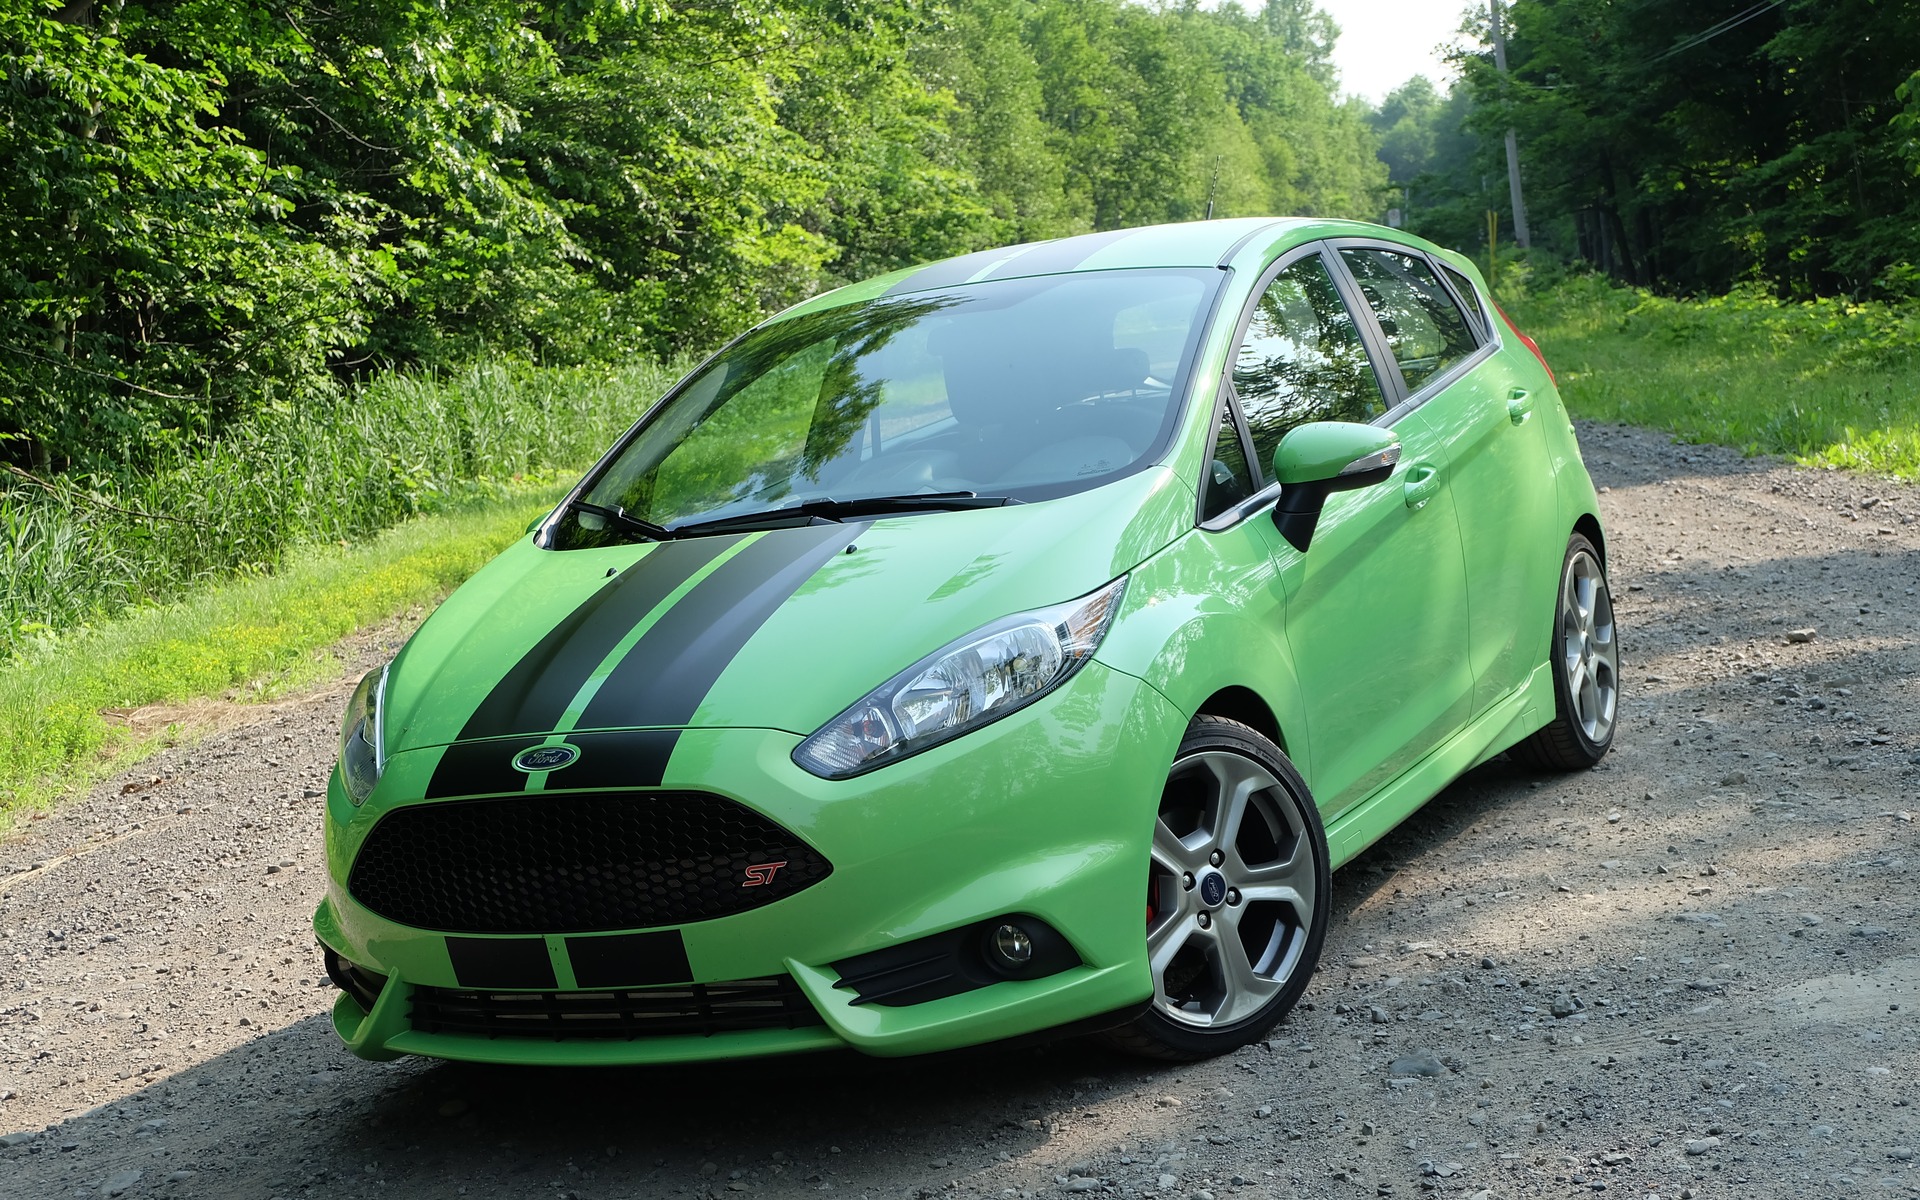 The Ford Fiesta ST comes standard with 17-inch wheels and a full bodykit.